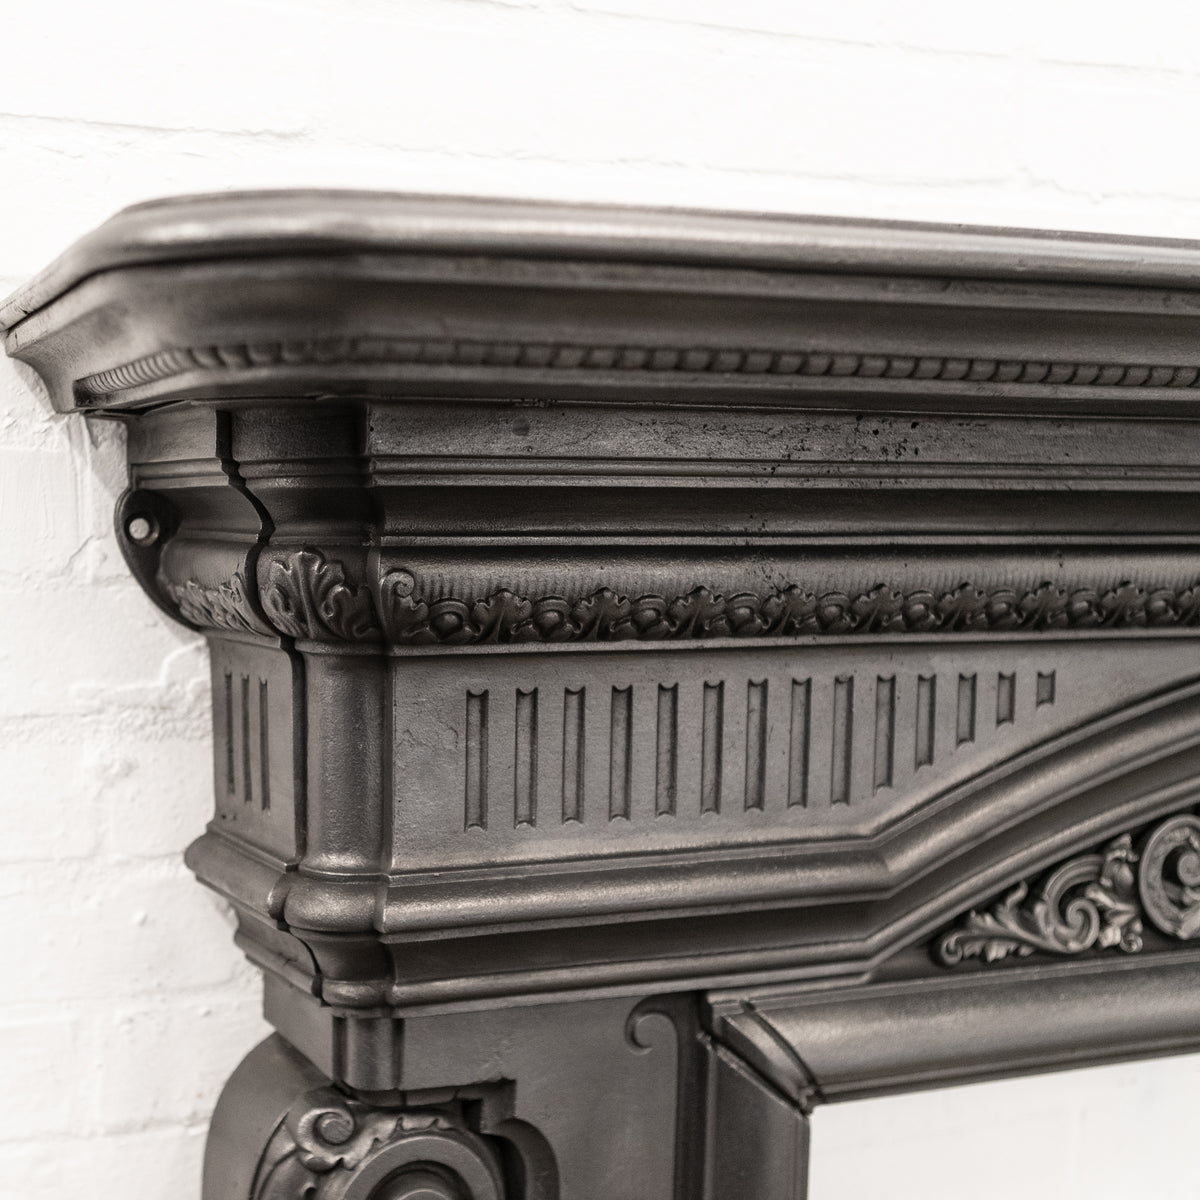 Antique Victorian Ornate Cast Iron Fireplace Surround | The Architectural Forum